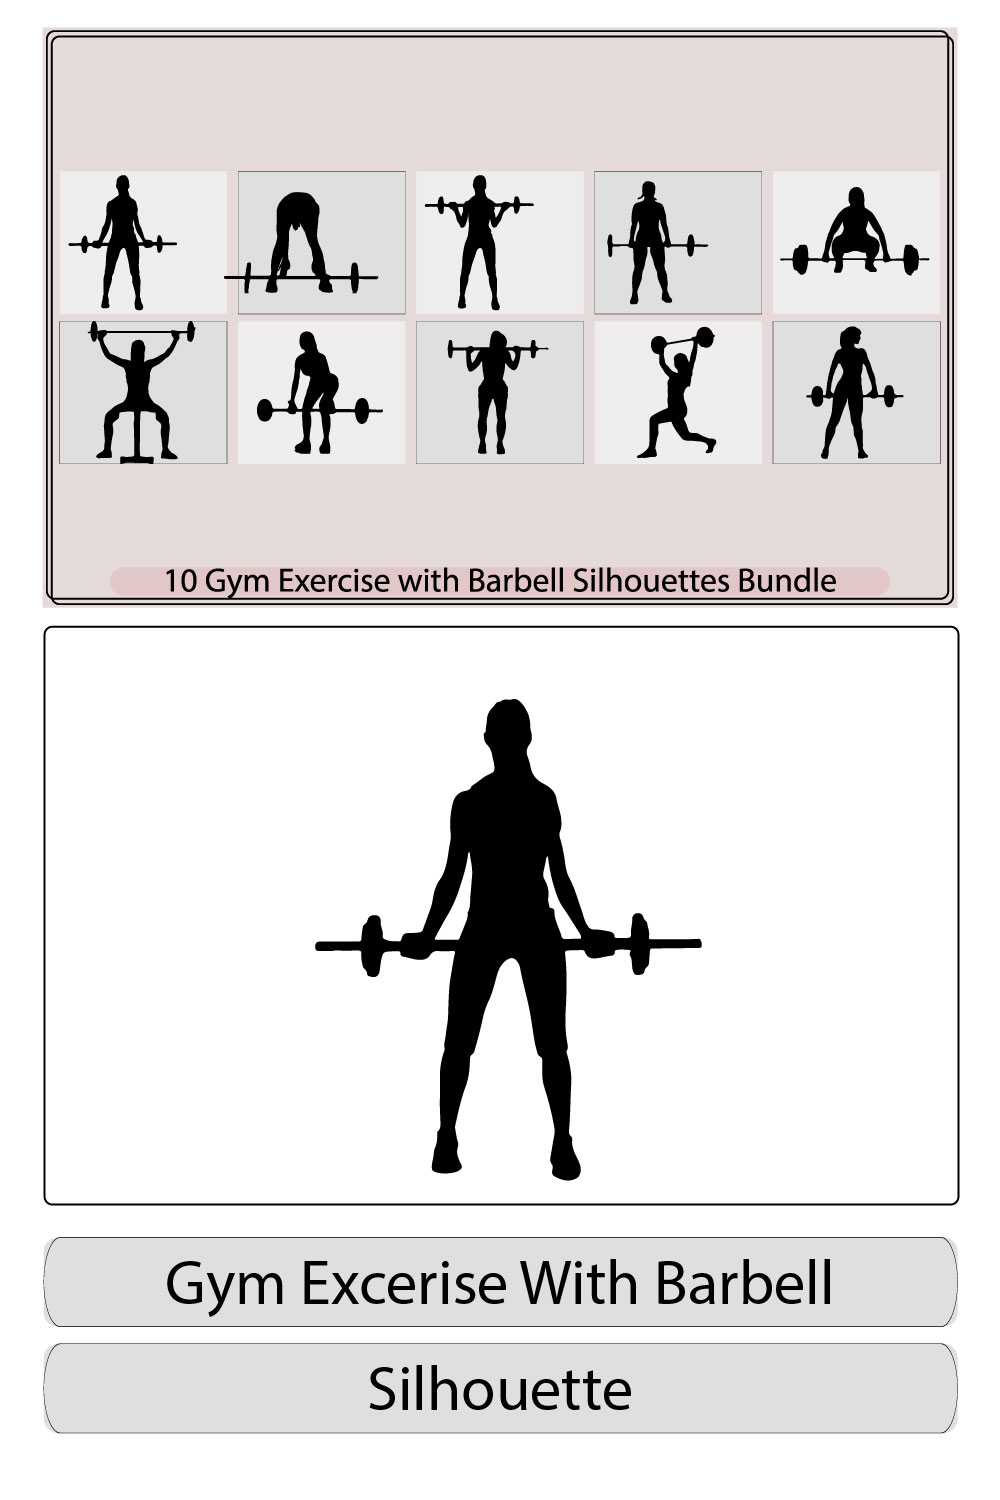 Weightlifter lifts big barbell,Squats with weight Woman lifts big barbell,Fitness Club emblem Training Woman with barbell pinterest preview image.